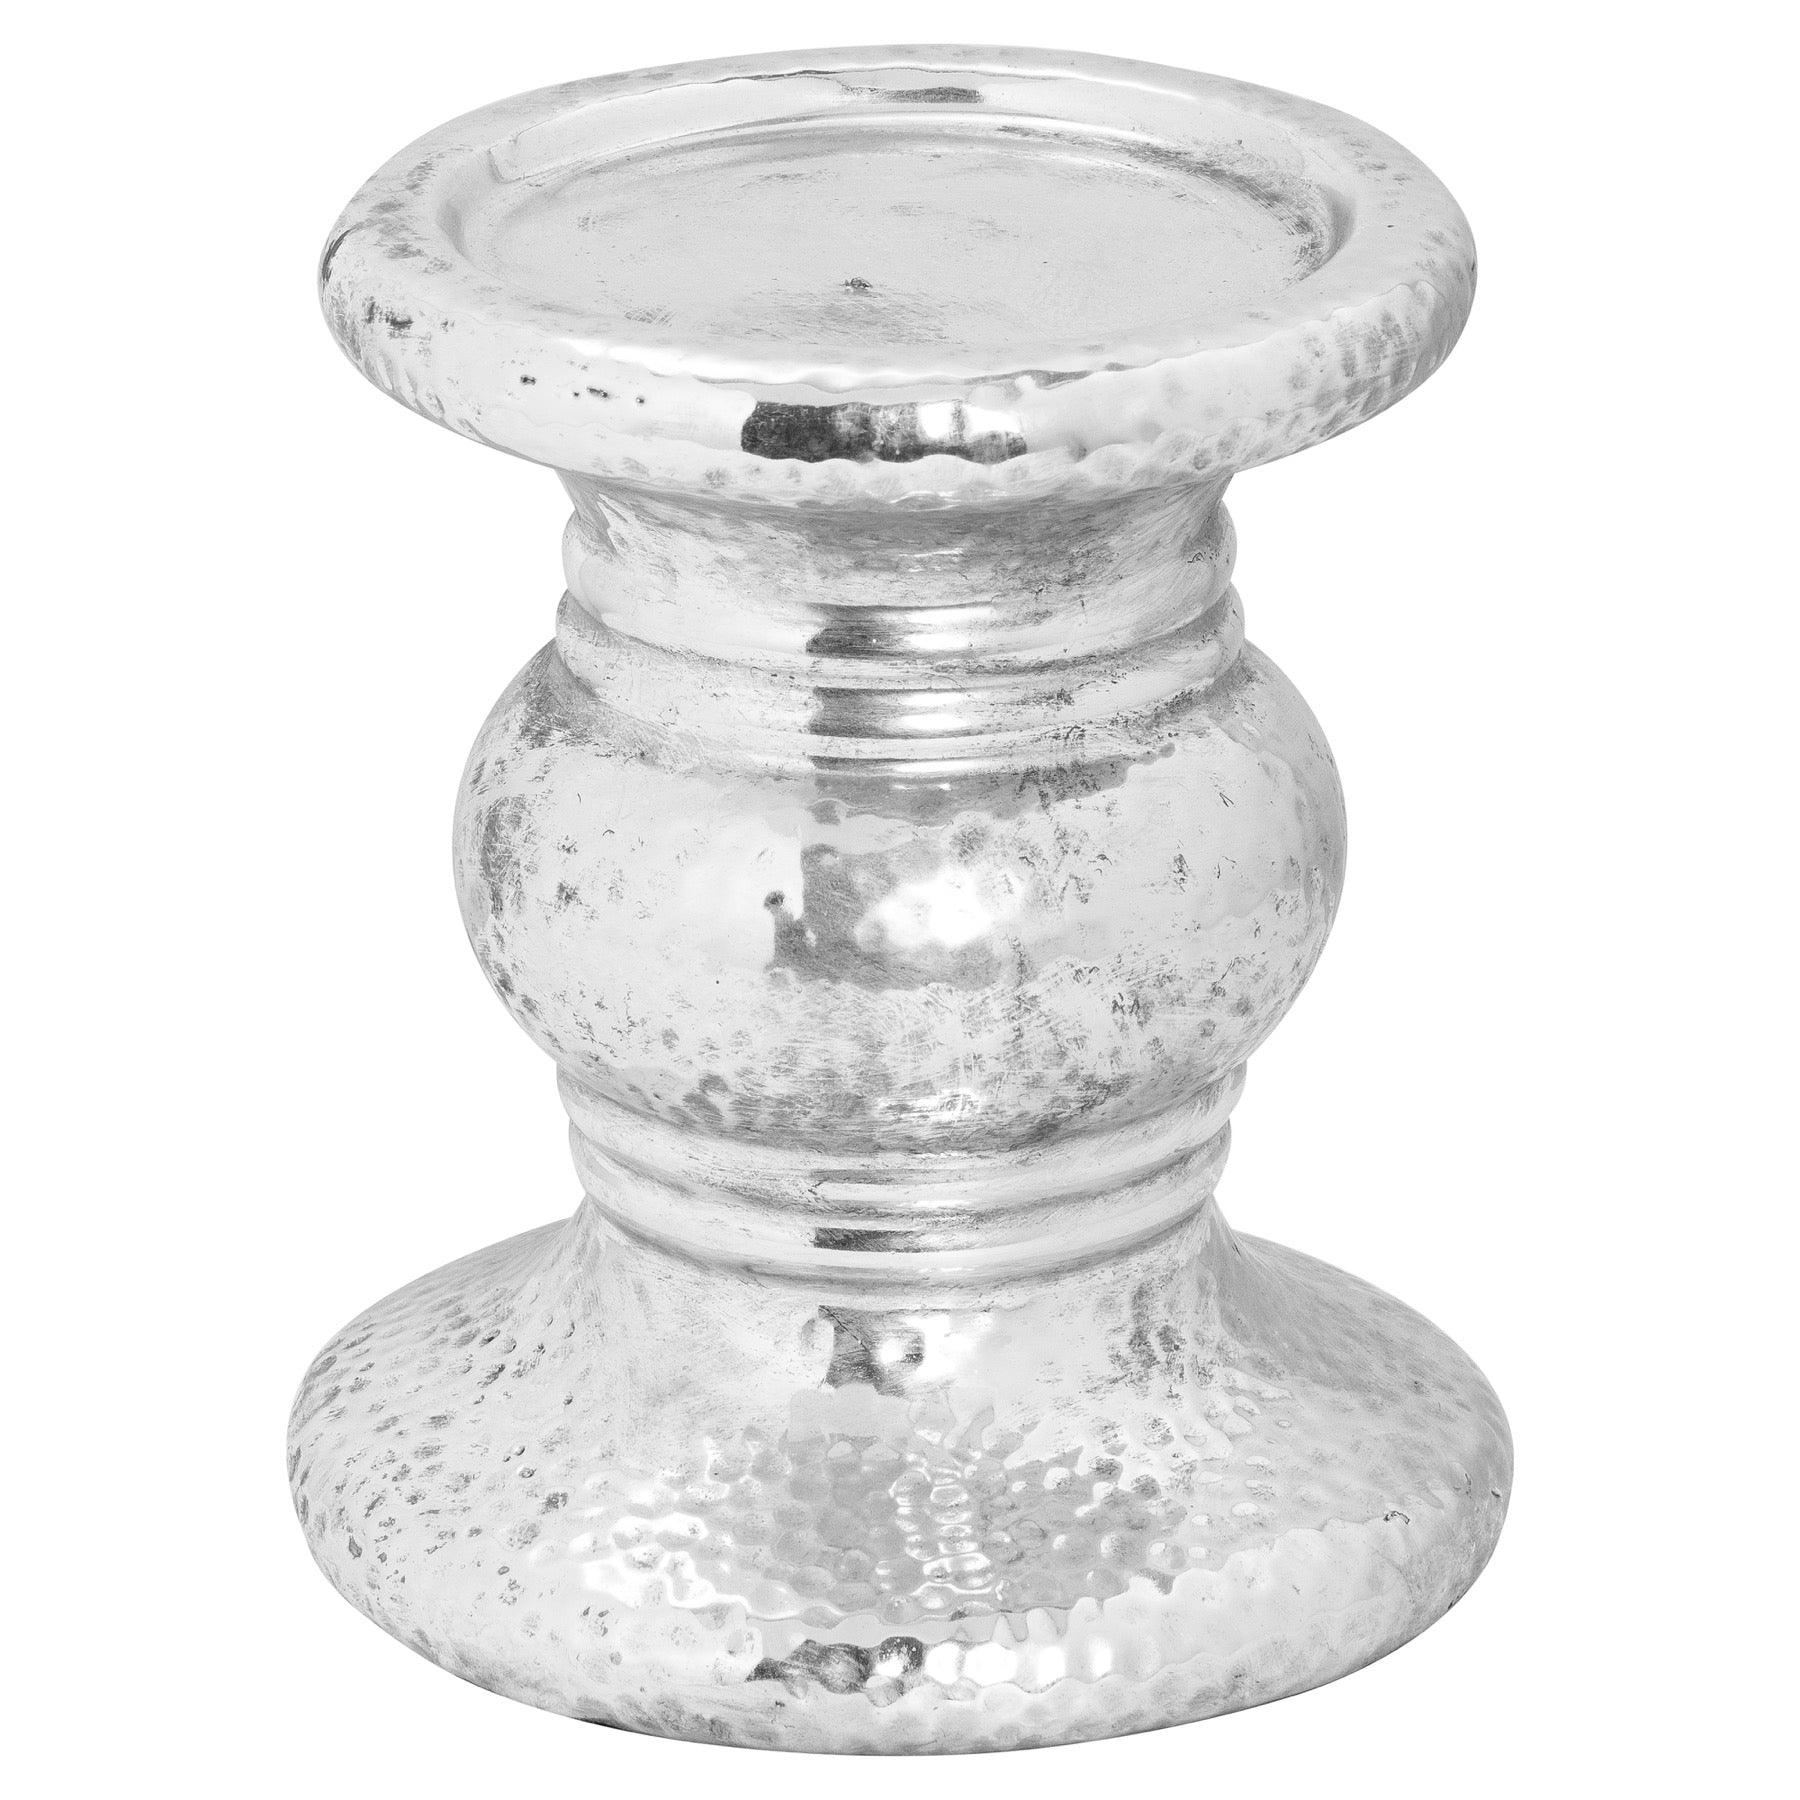 View Silver Punch Faced Ceramic Candle Holder information